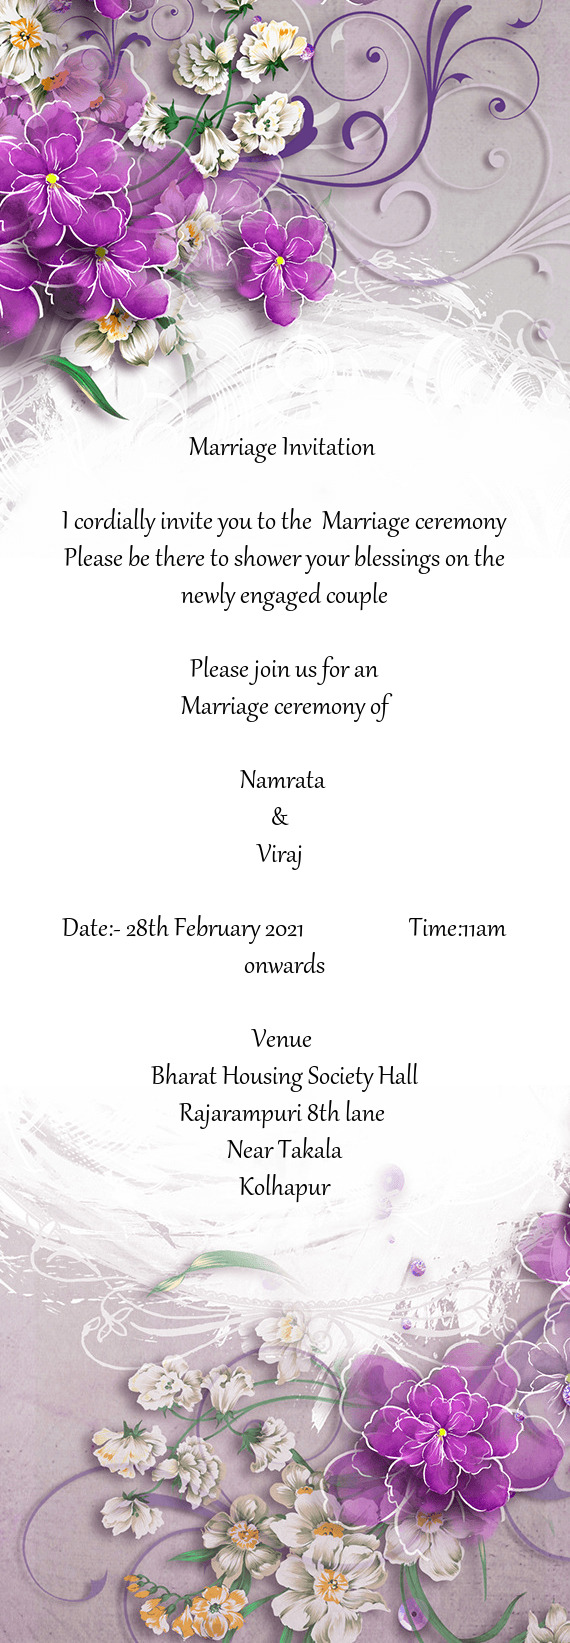 I cordially invite you to the Marriage ceremony